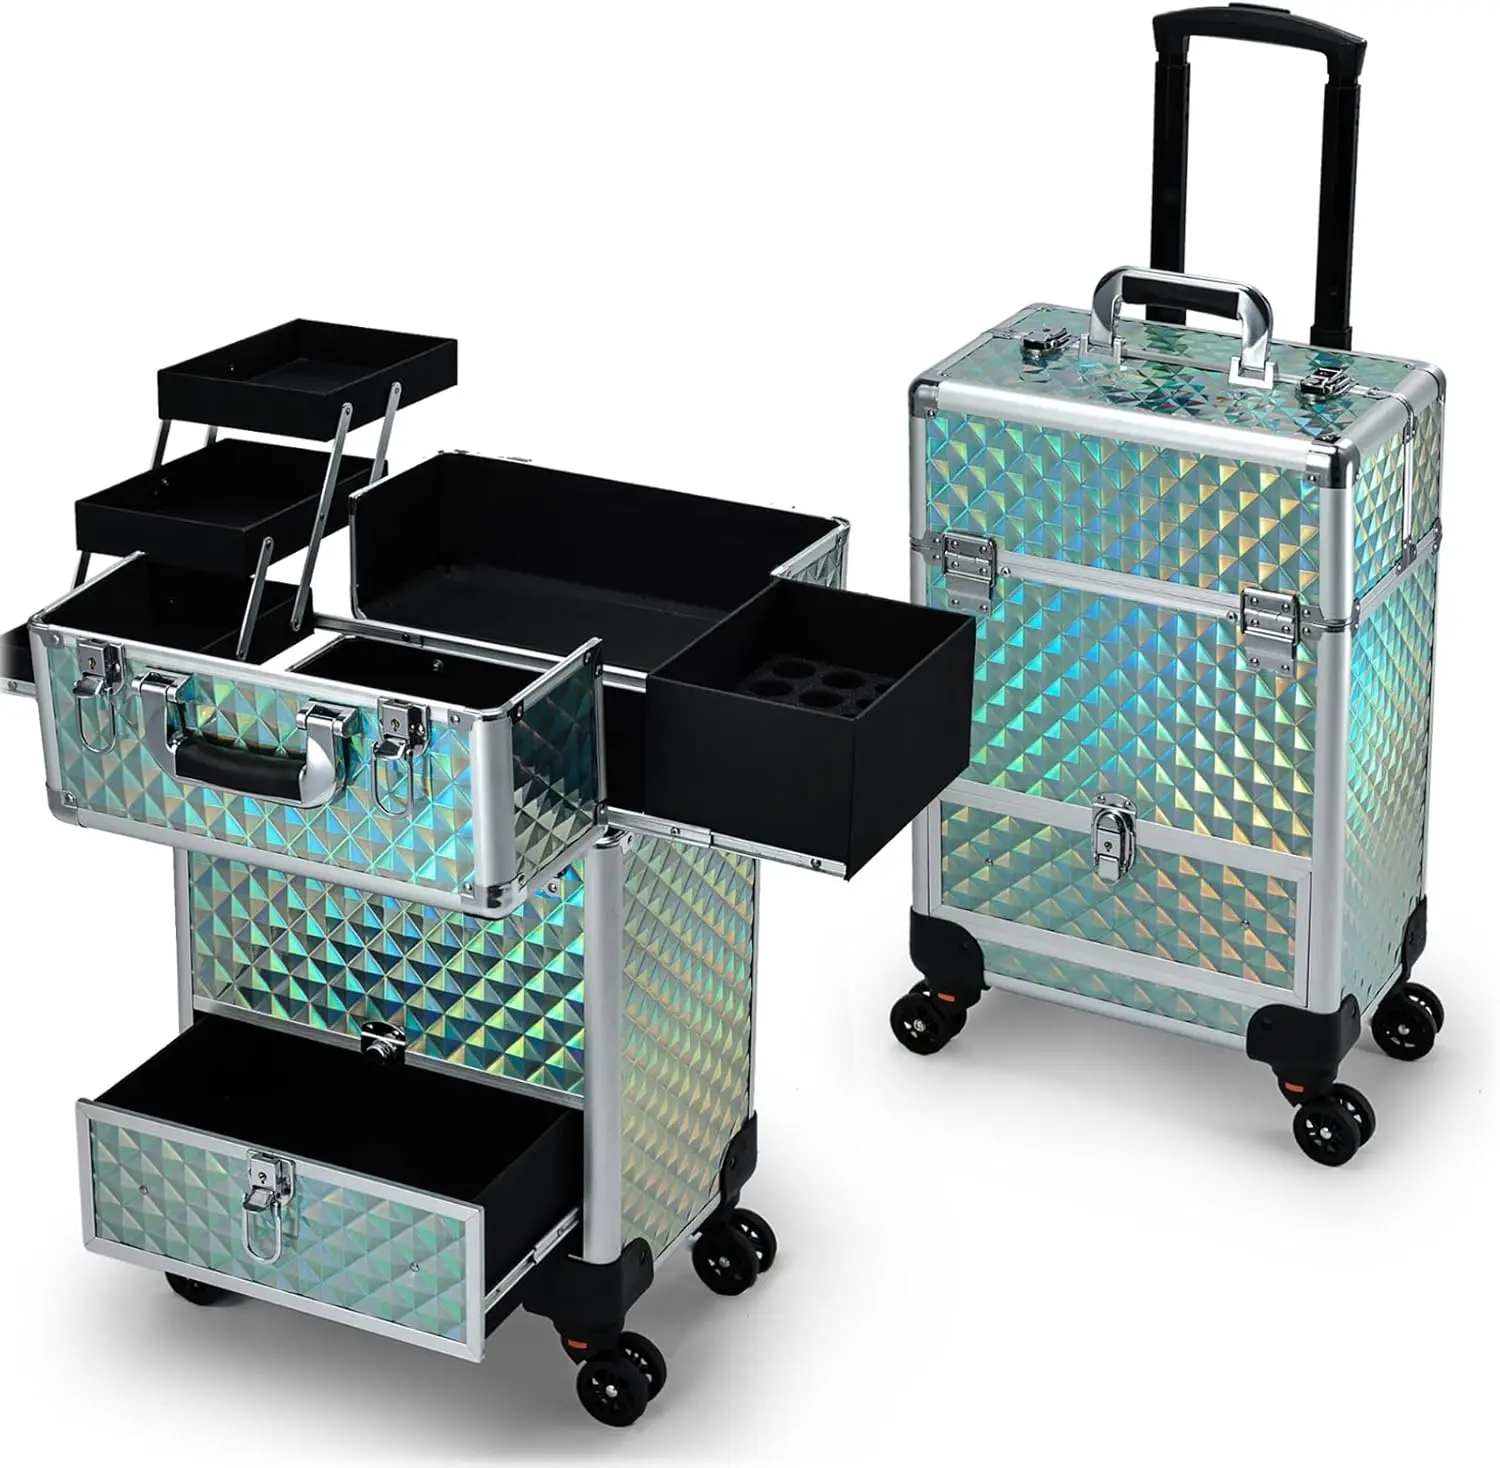 

Hododou Rolling Makeup Case with Drawer Travel Trolley Cosmetology Case on Wheel Makeup Storage Salon Barber Case Traveling Cart